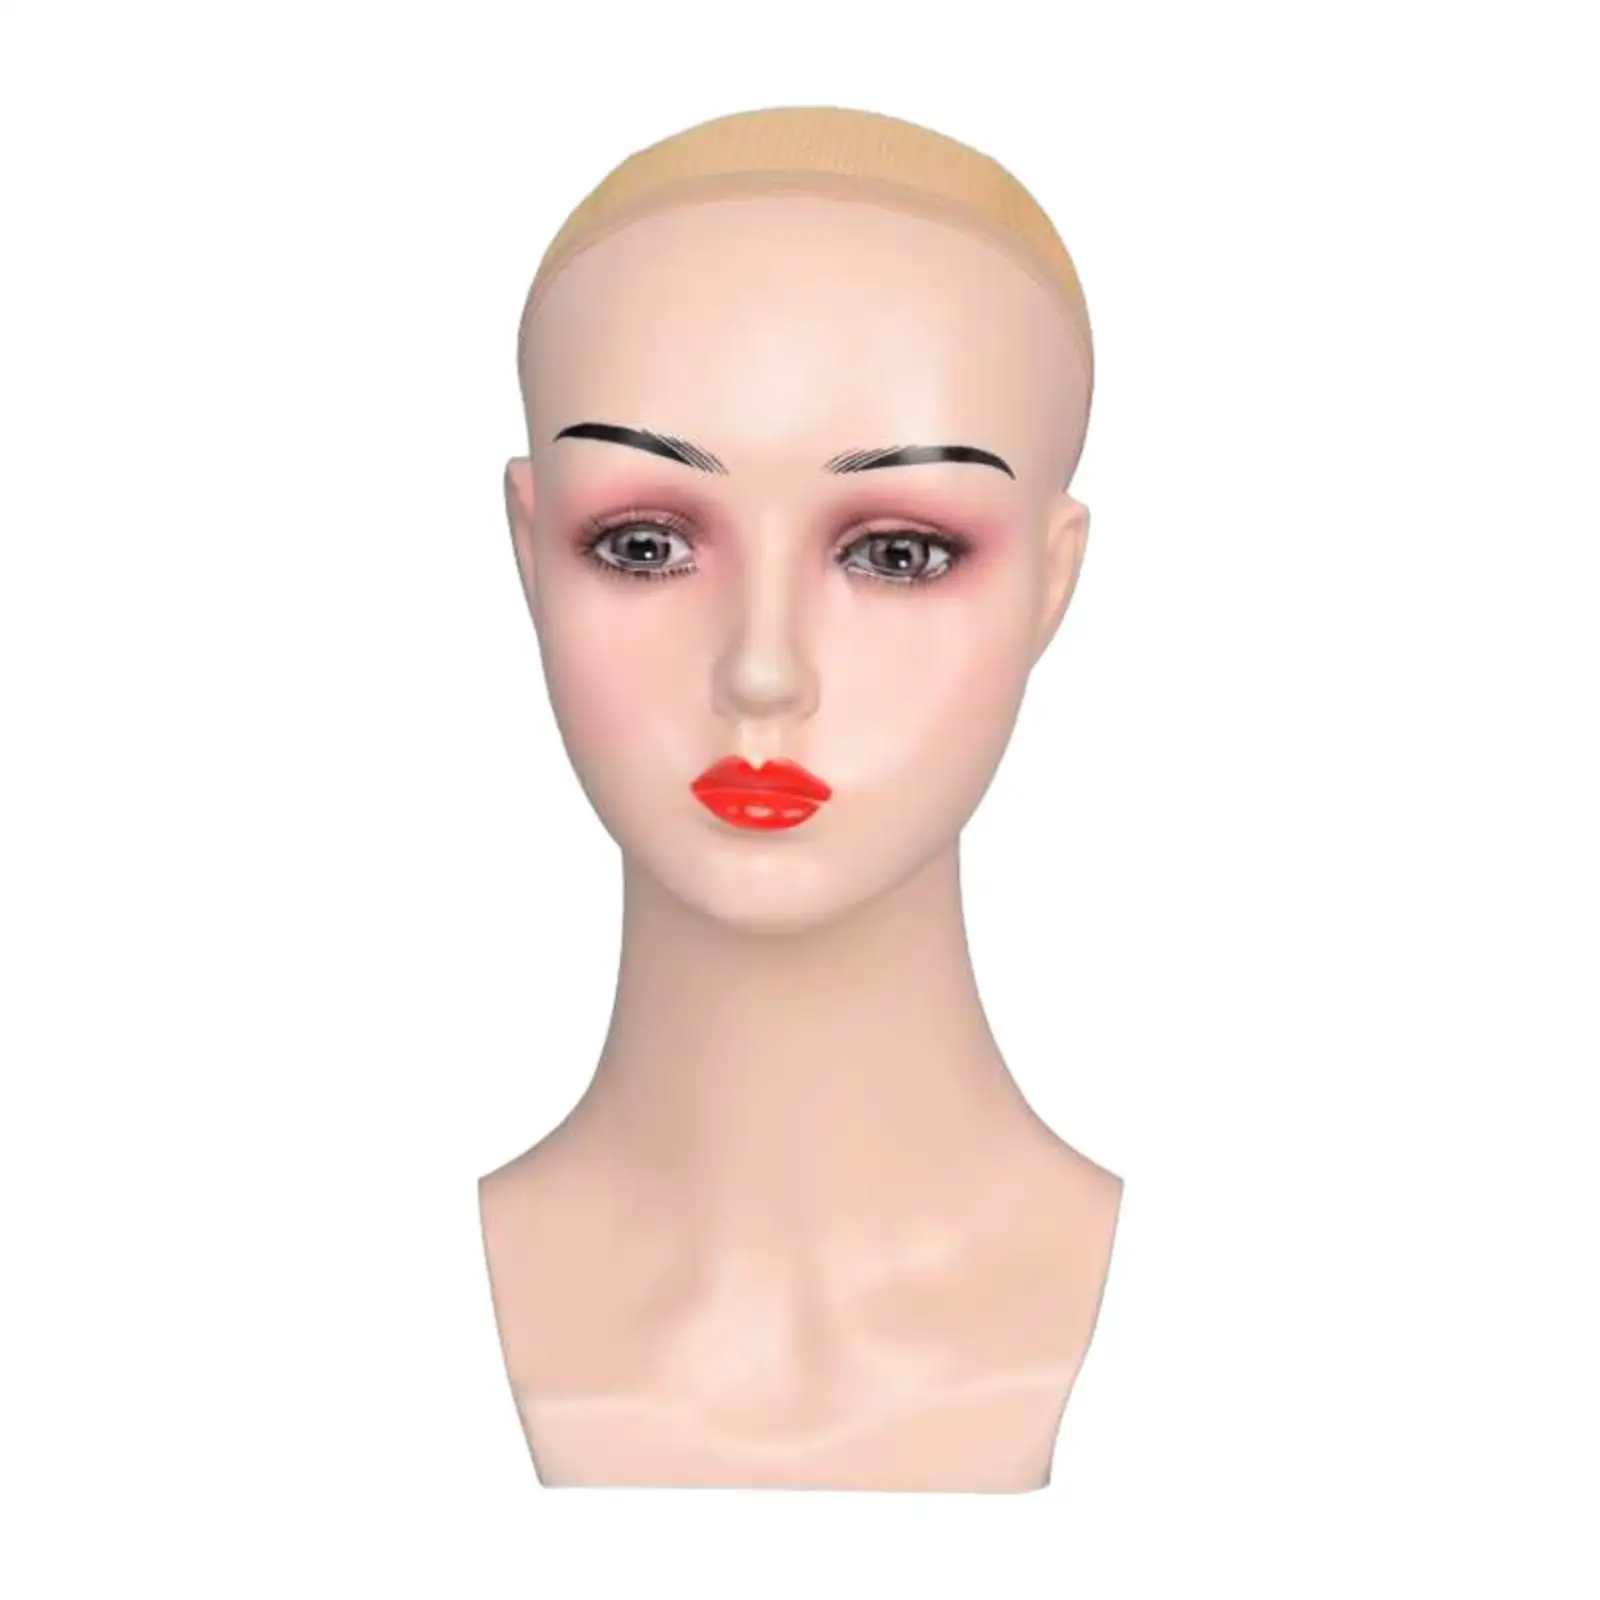 Female Bald Mannequin Head Hat Display Rack Multipurpose Wig Display Model for Necklace Jewelry Hairpieces Wigs Making Hats